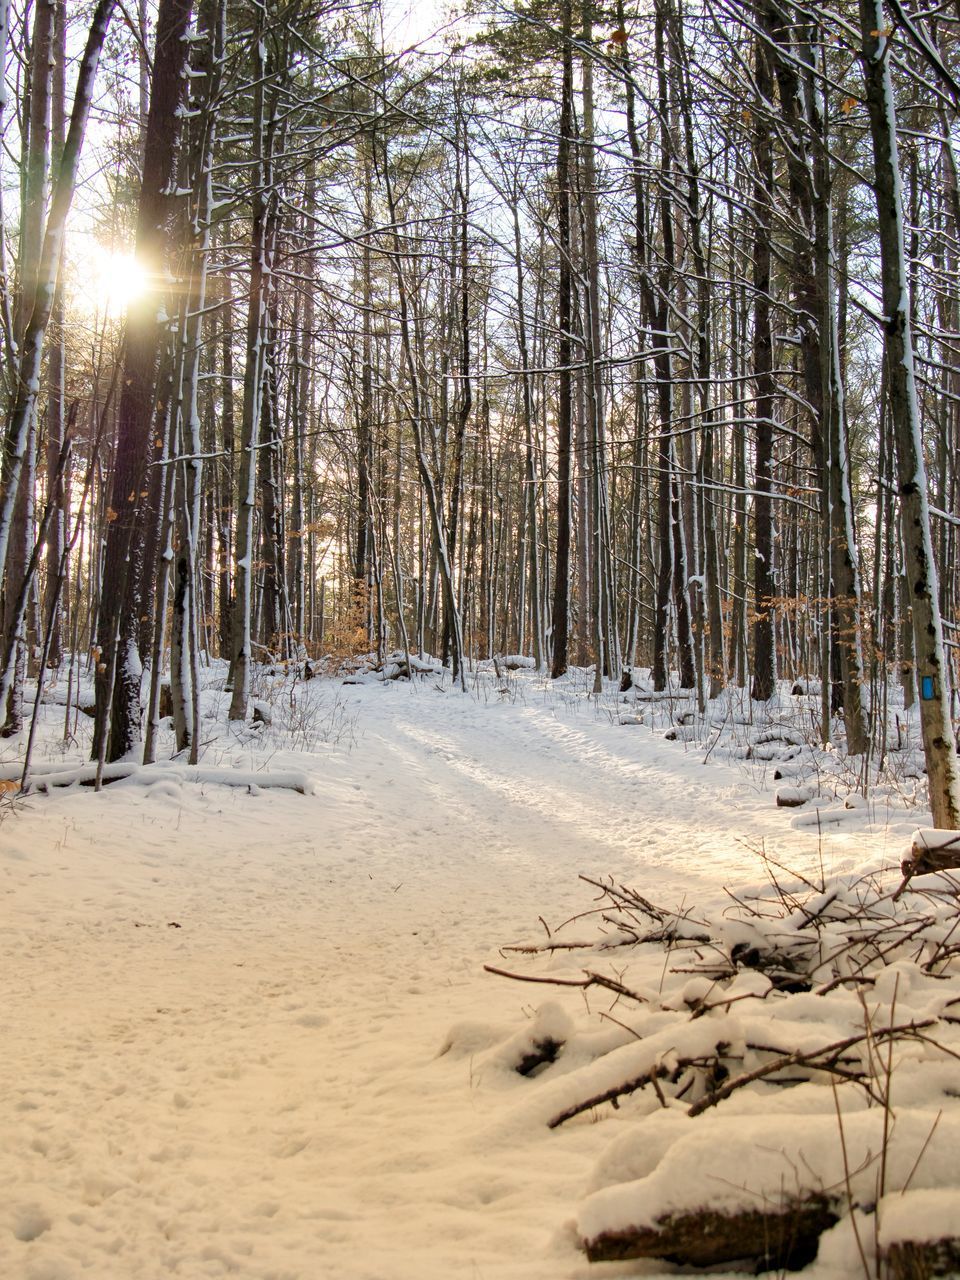 SCENIC VIEW OF SNOW COVERED FOREST